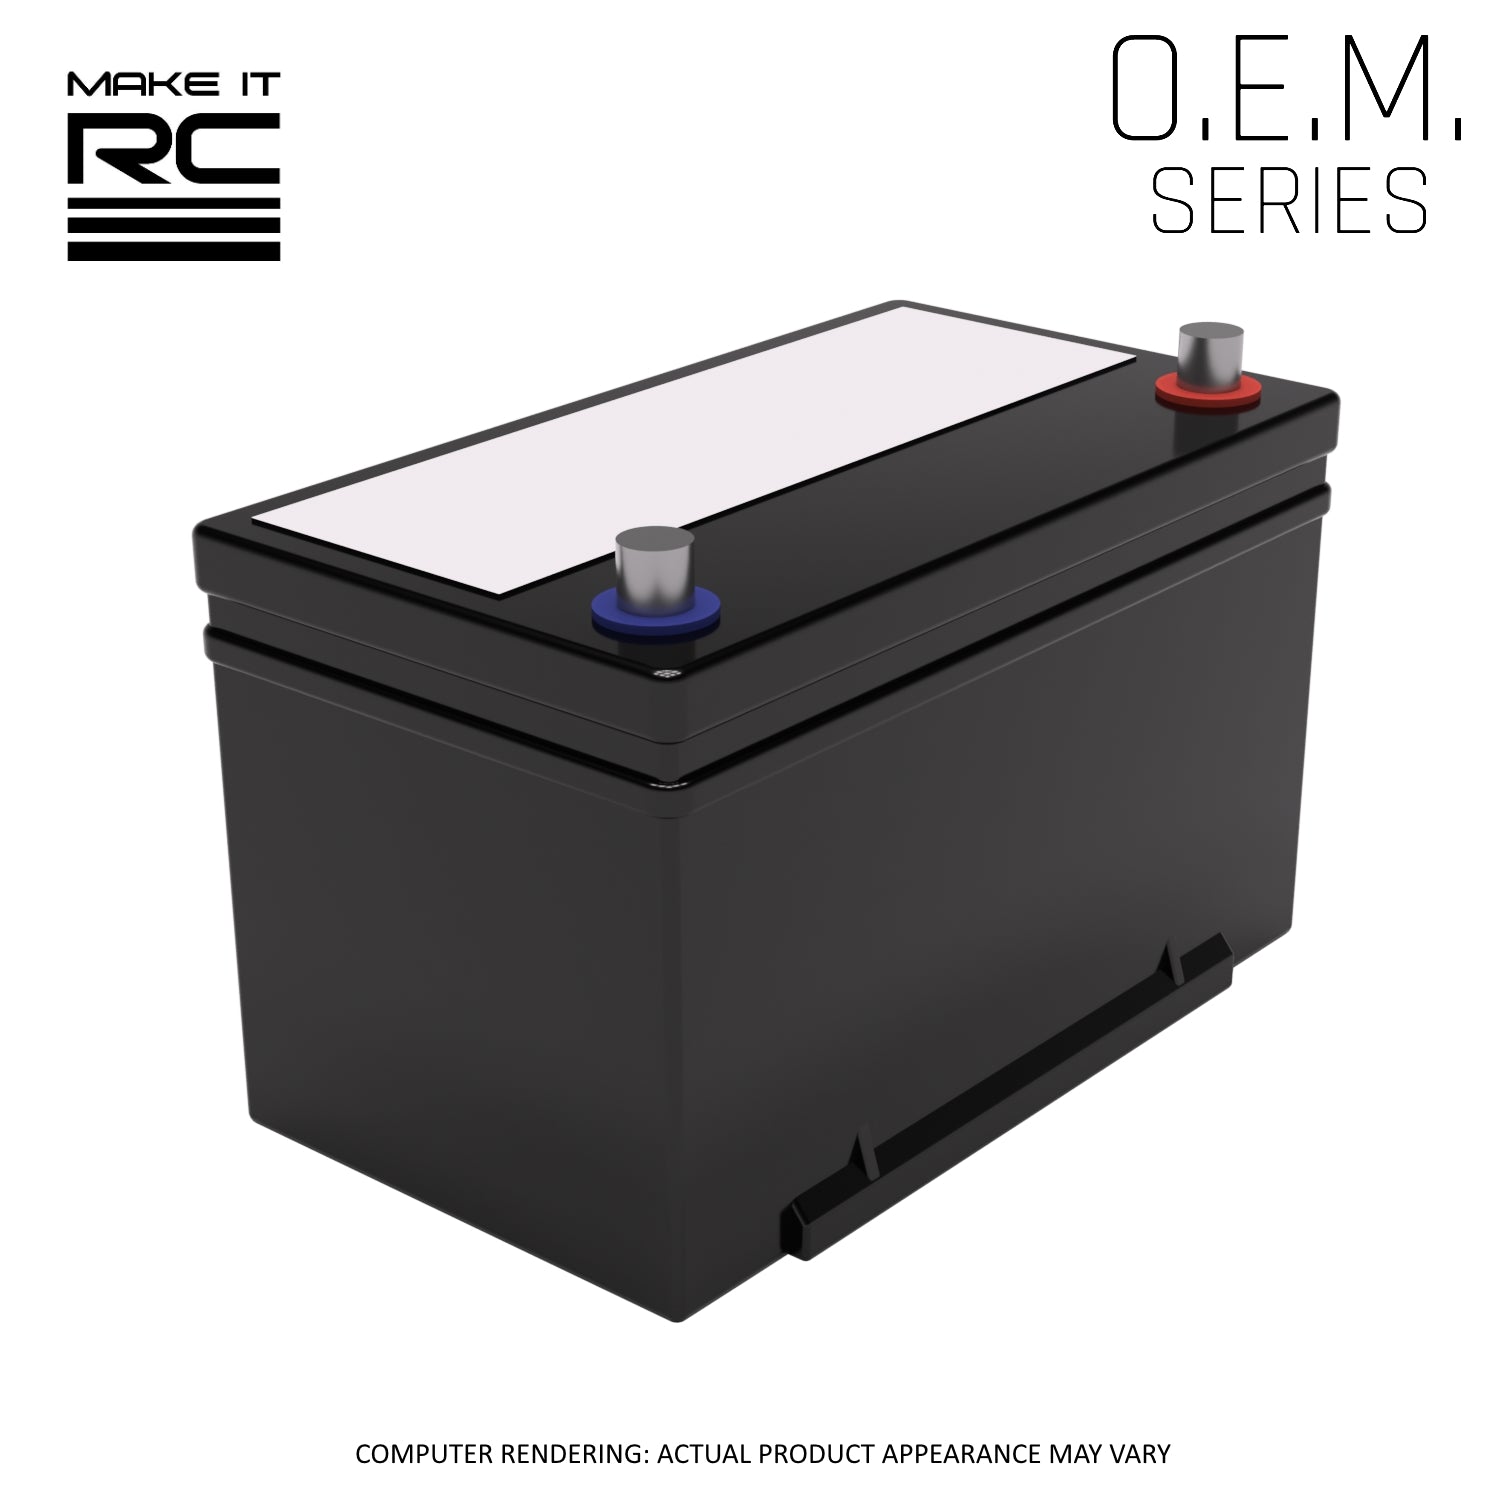 Make It RC 1/10 Scale Series 94R Battery